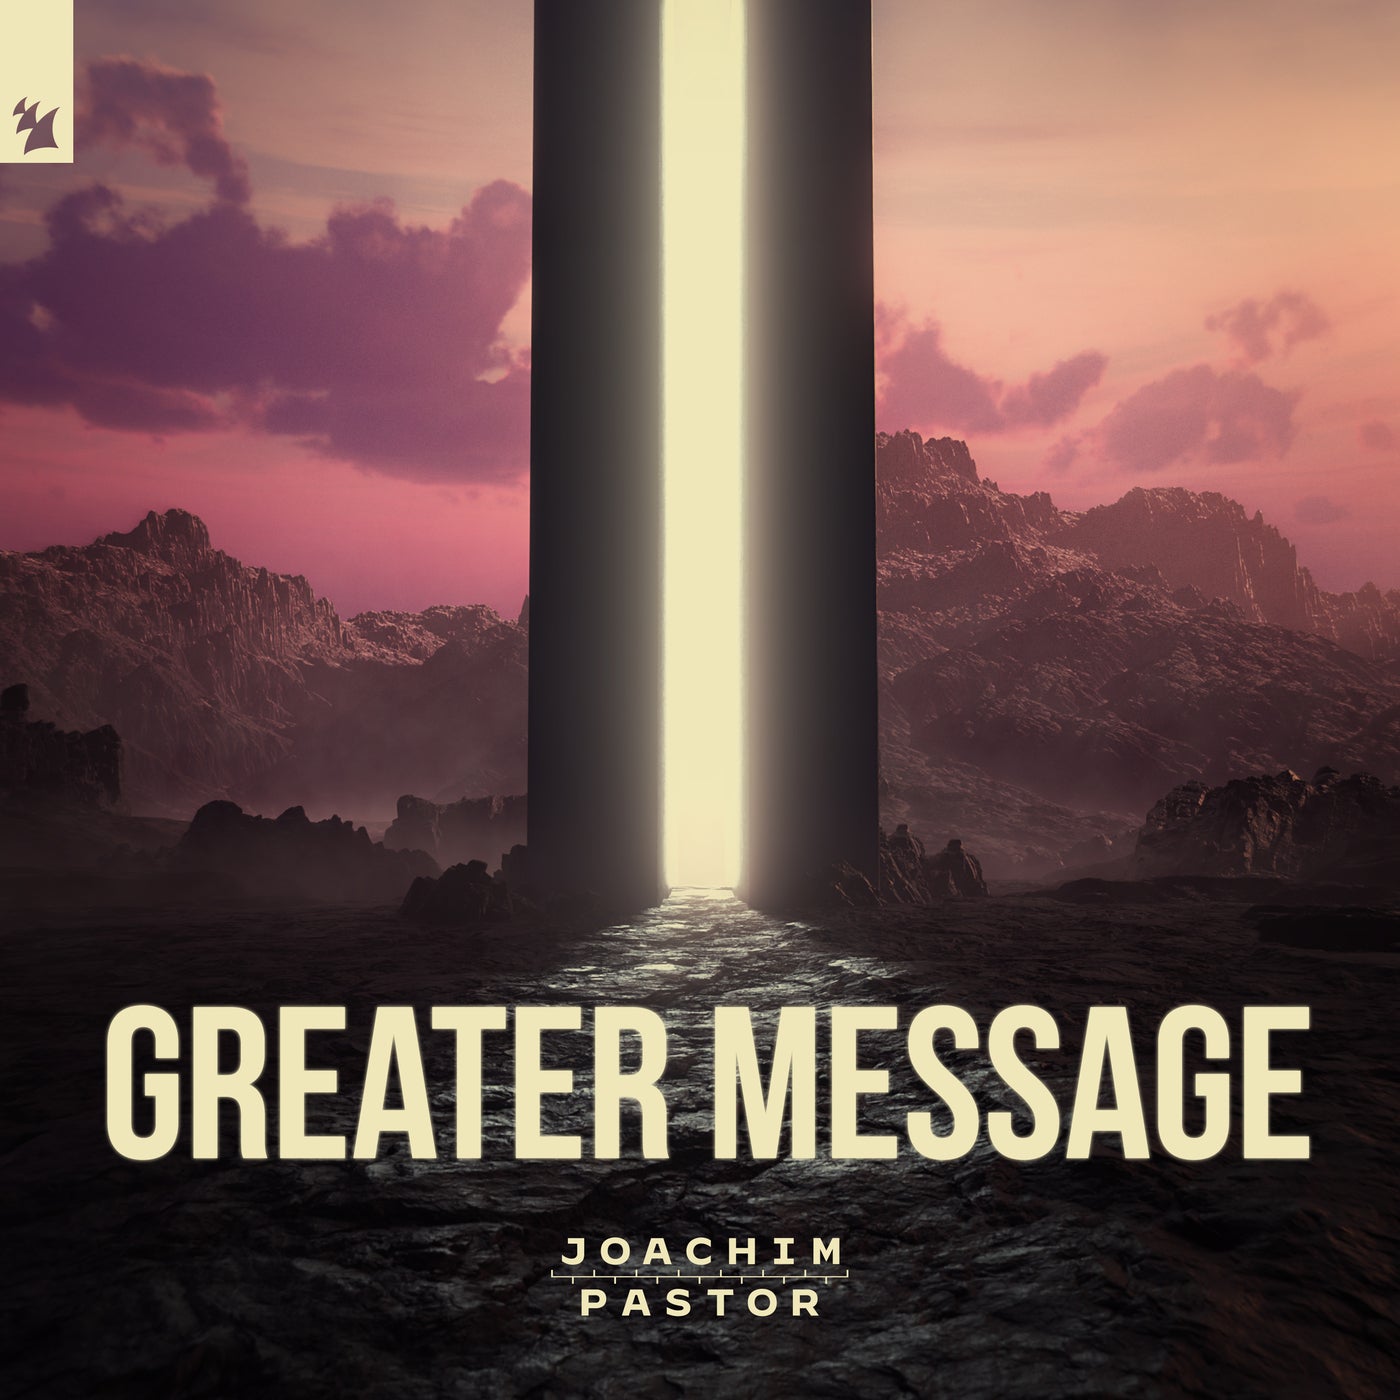 Download Greater Message on Electrobuzz